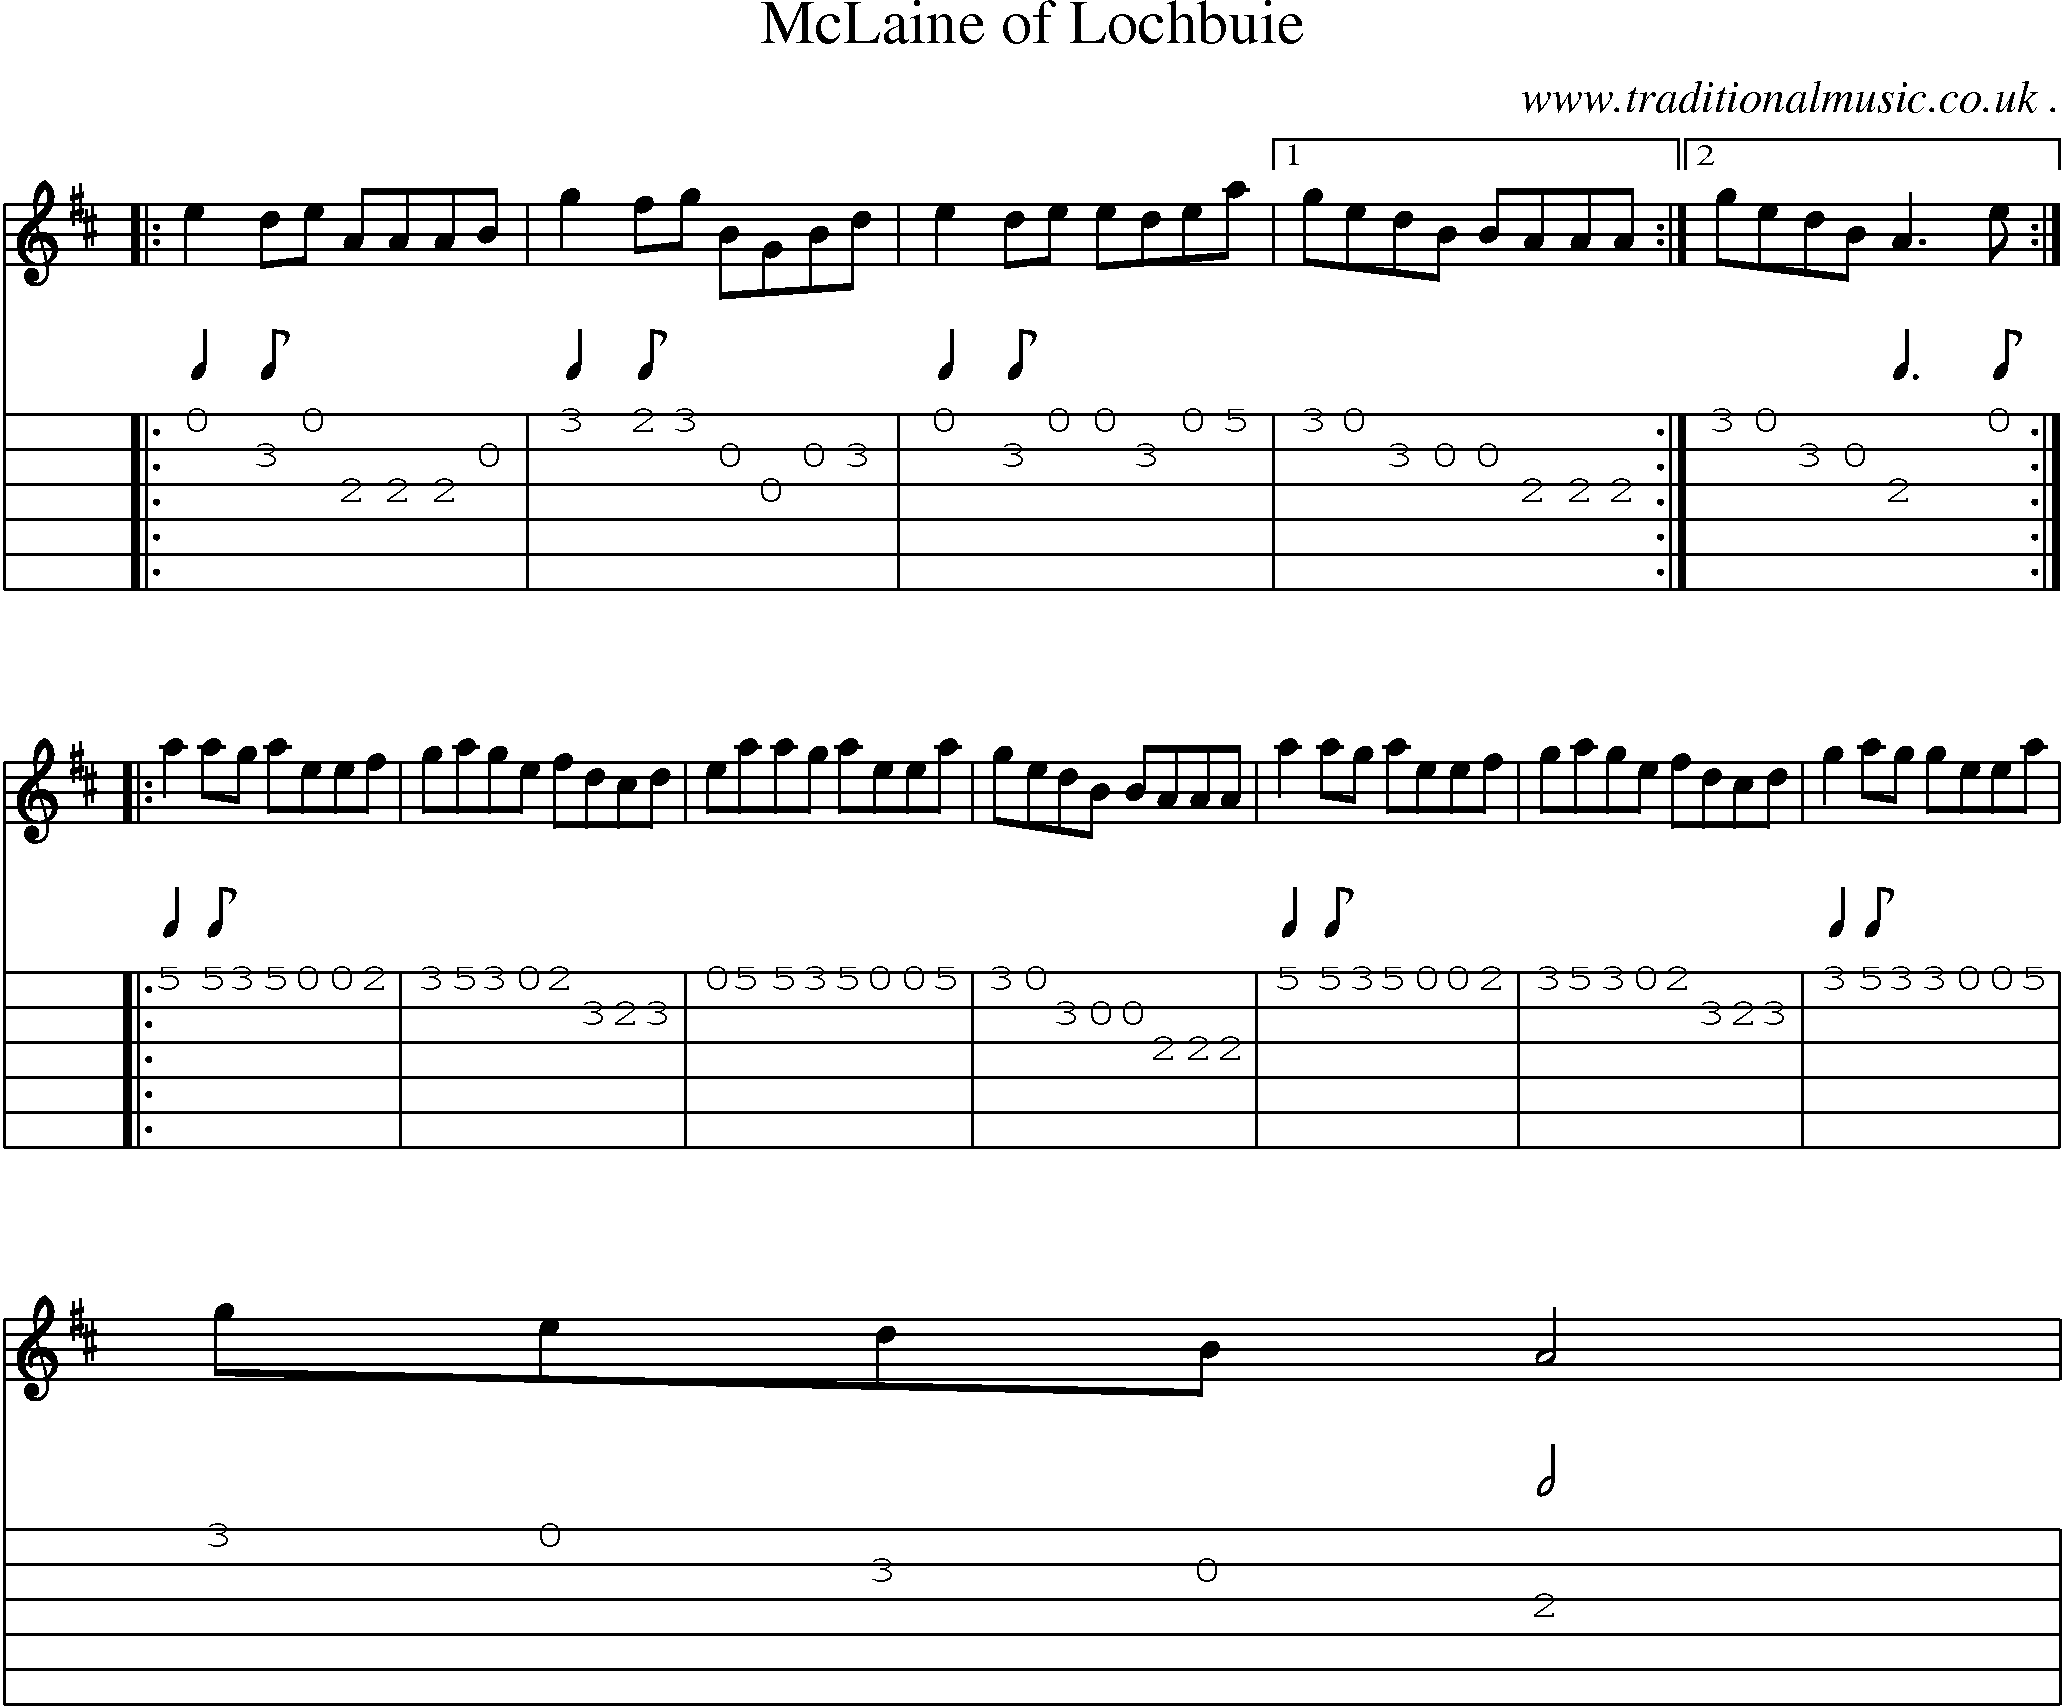 Sheet-music  score, Chords and Guitar Tabs for Mclaine Of Lochbuie